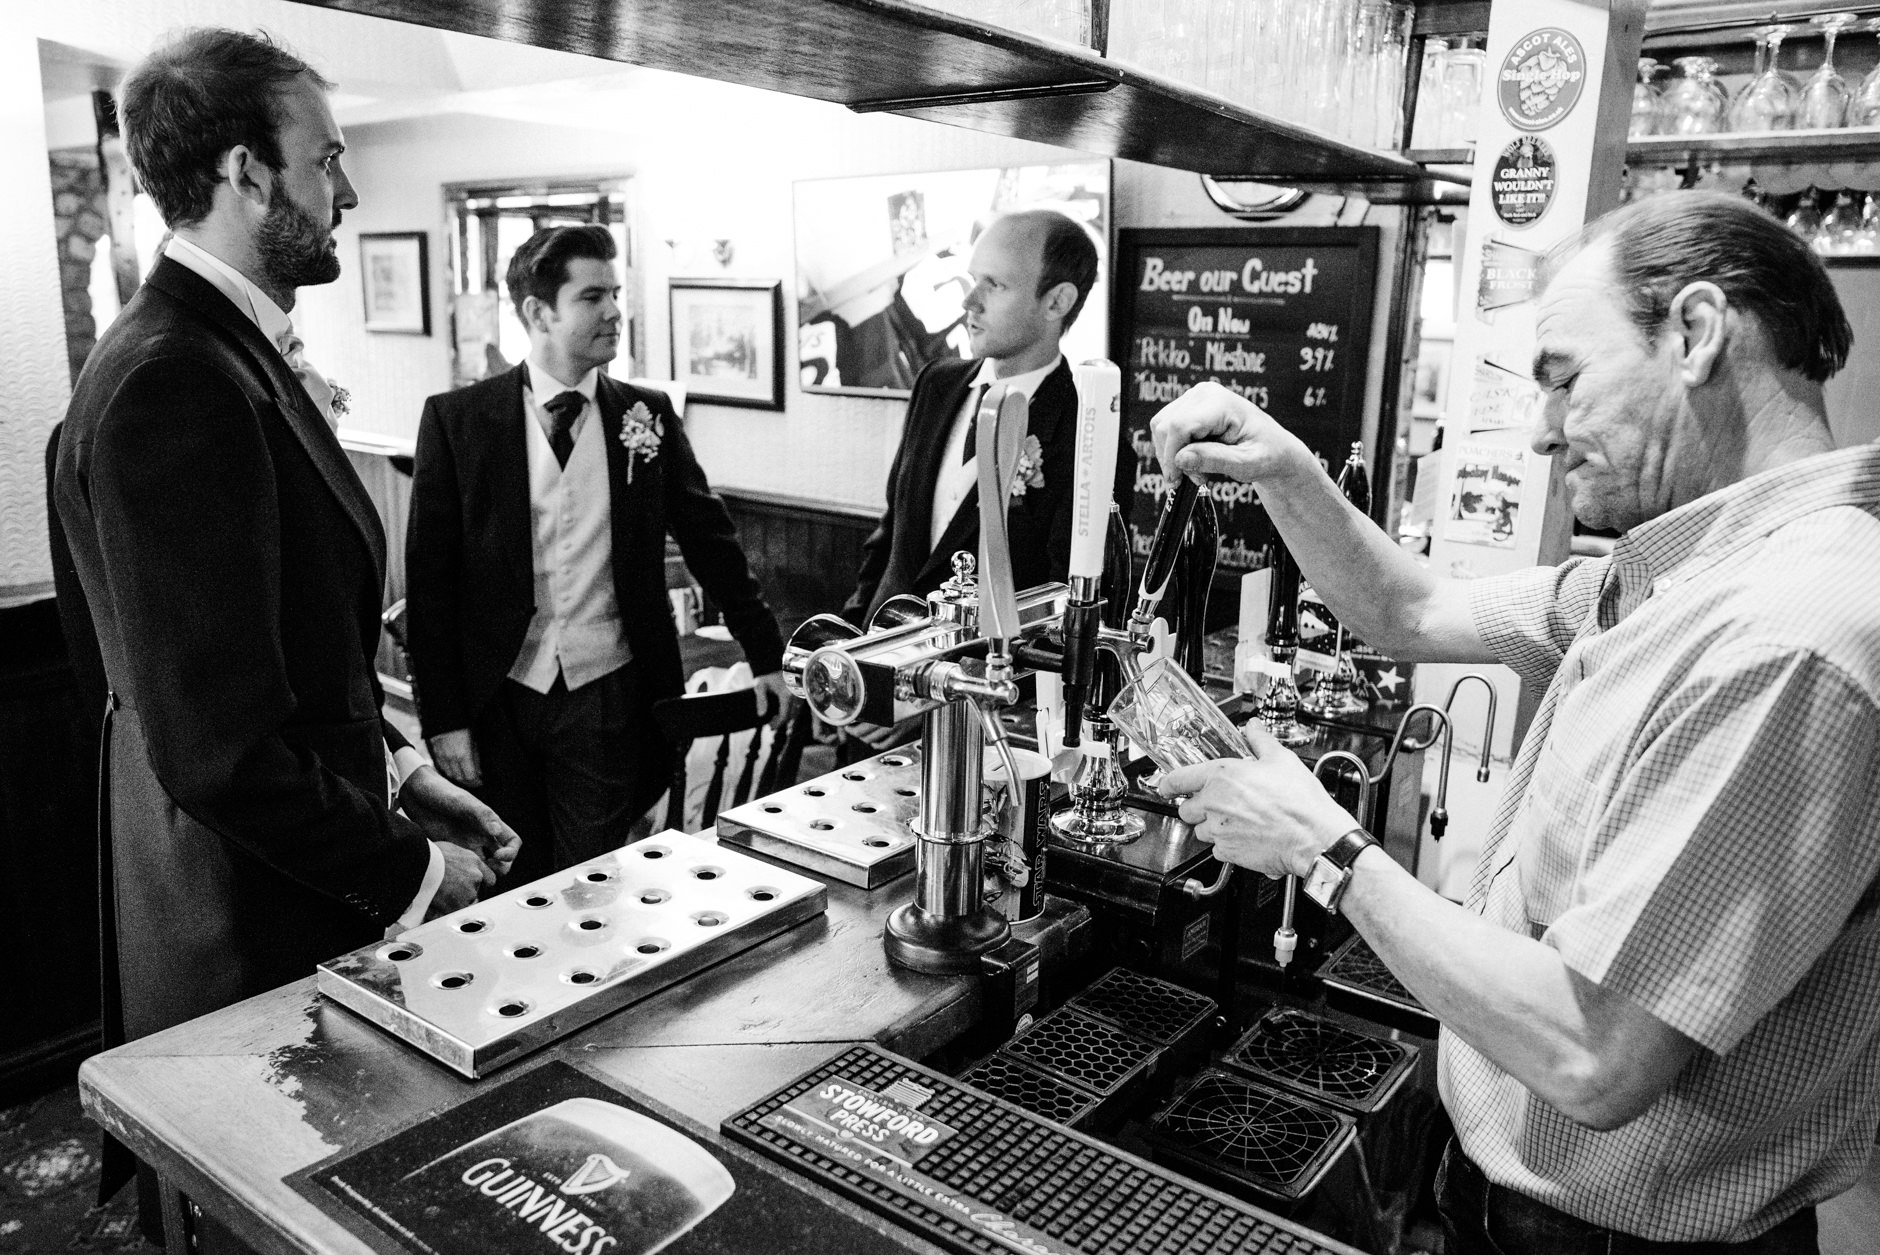 Groom having a drink in the pub before the ceremony